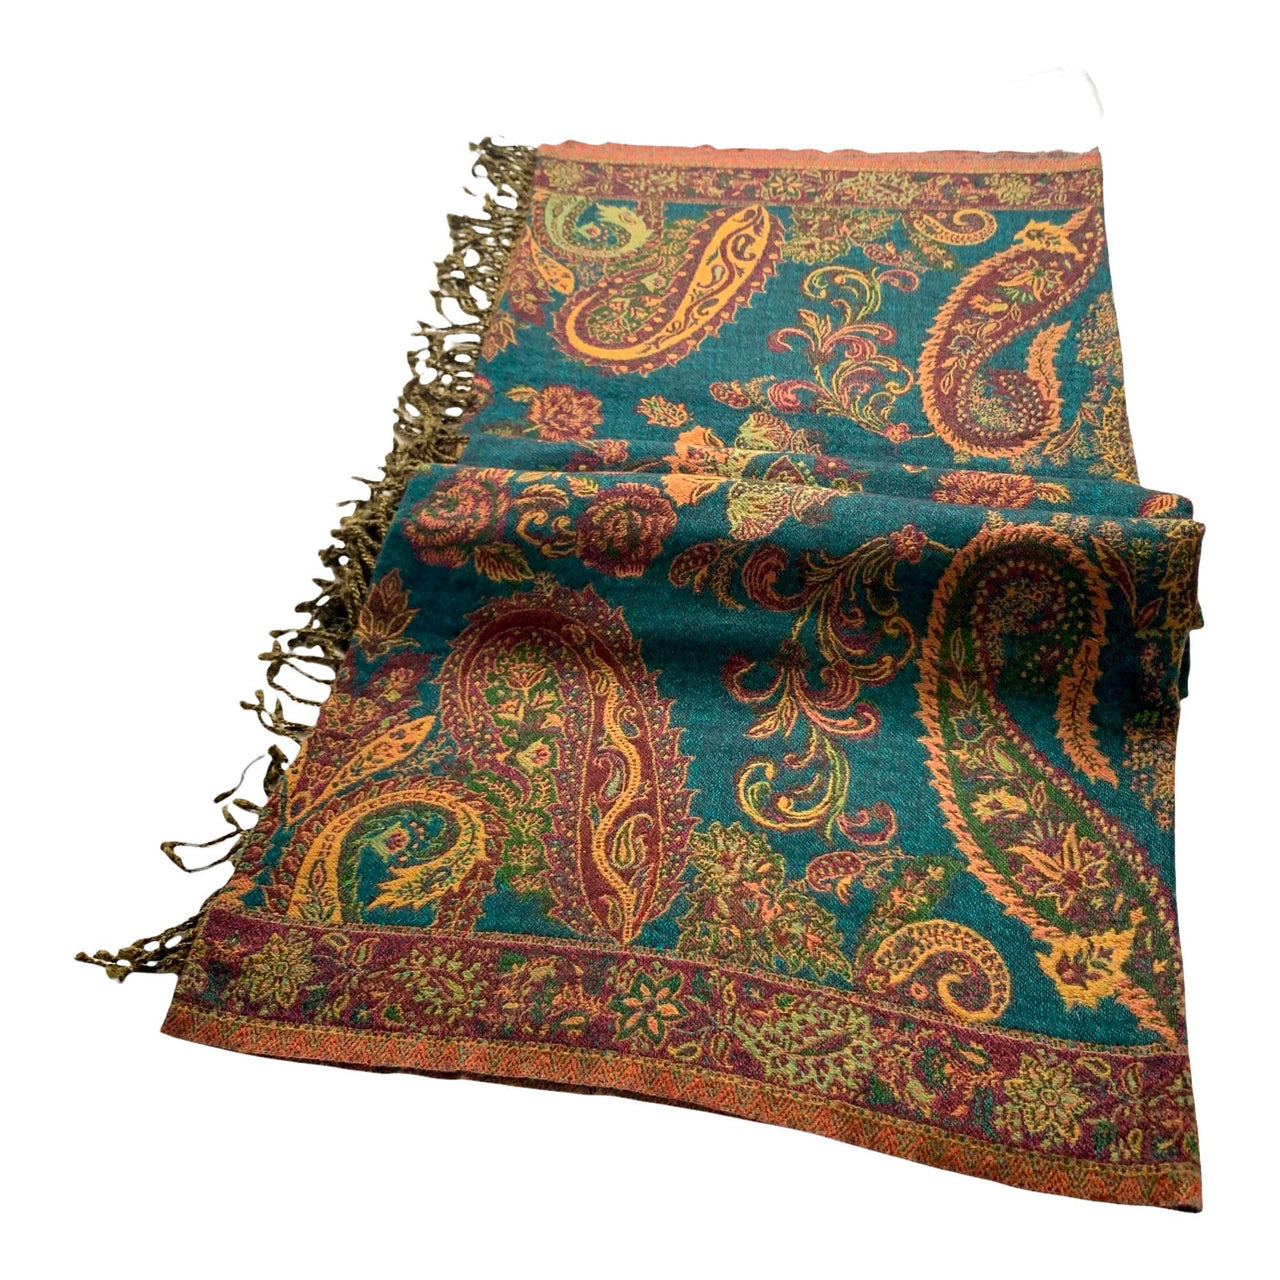 Teal ombré Multicoloured Paisley Boiled Wool Reversible Blanket Bed Throw Wrap